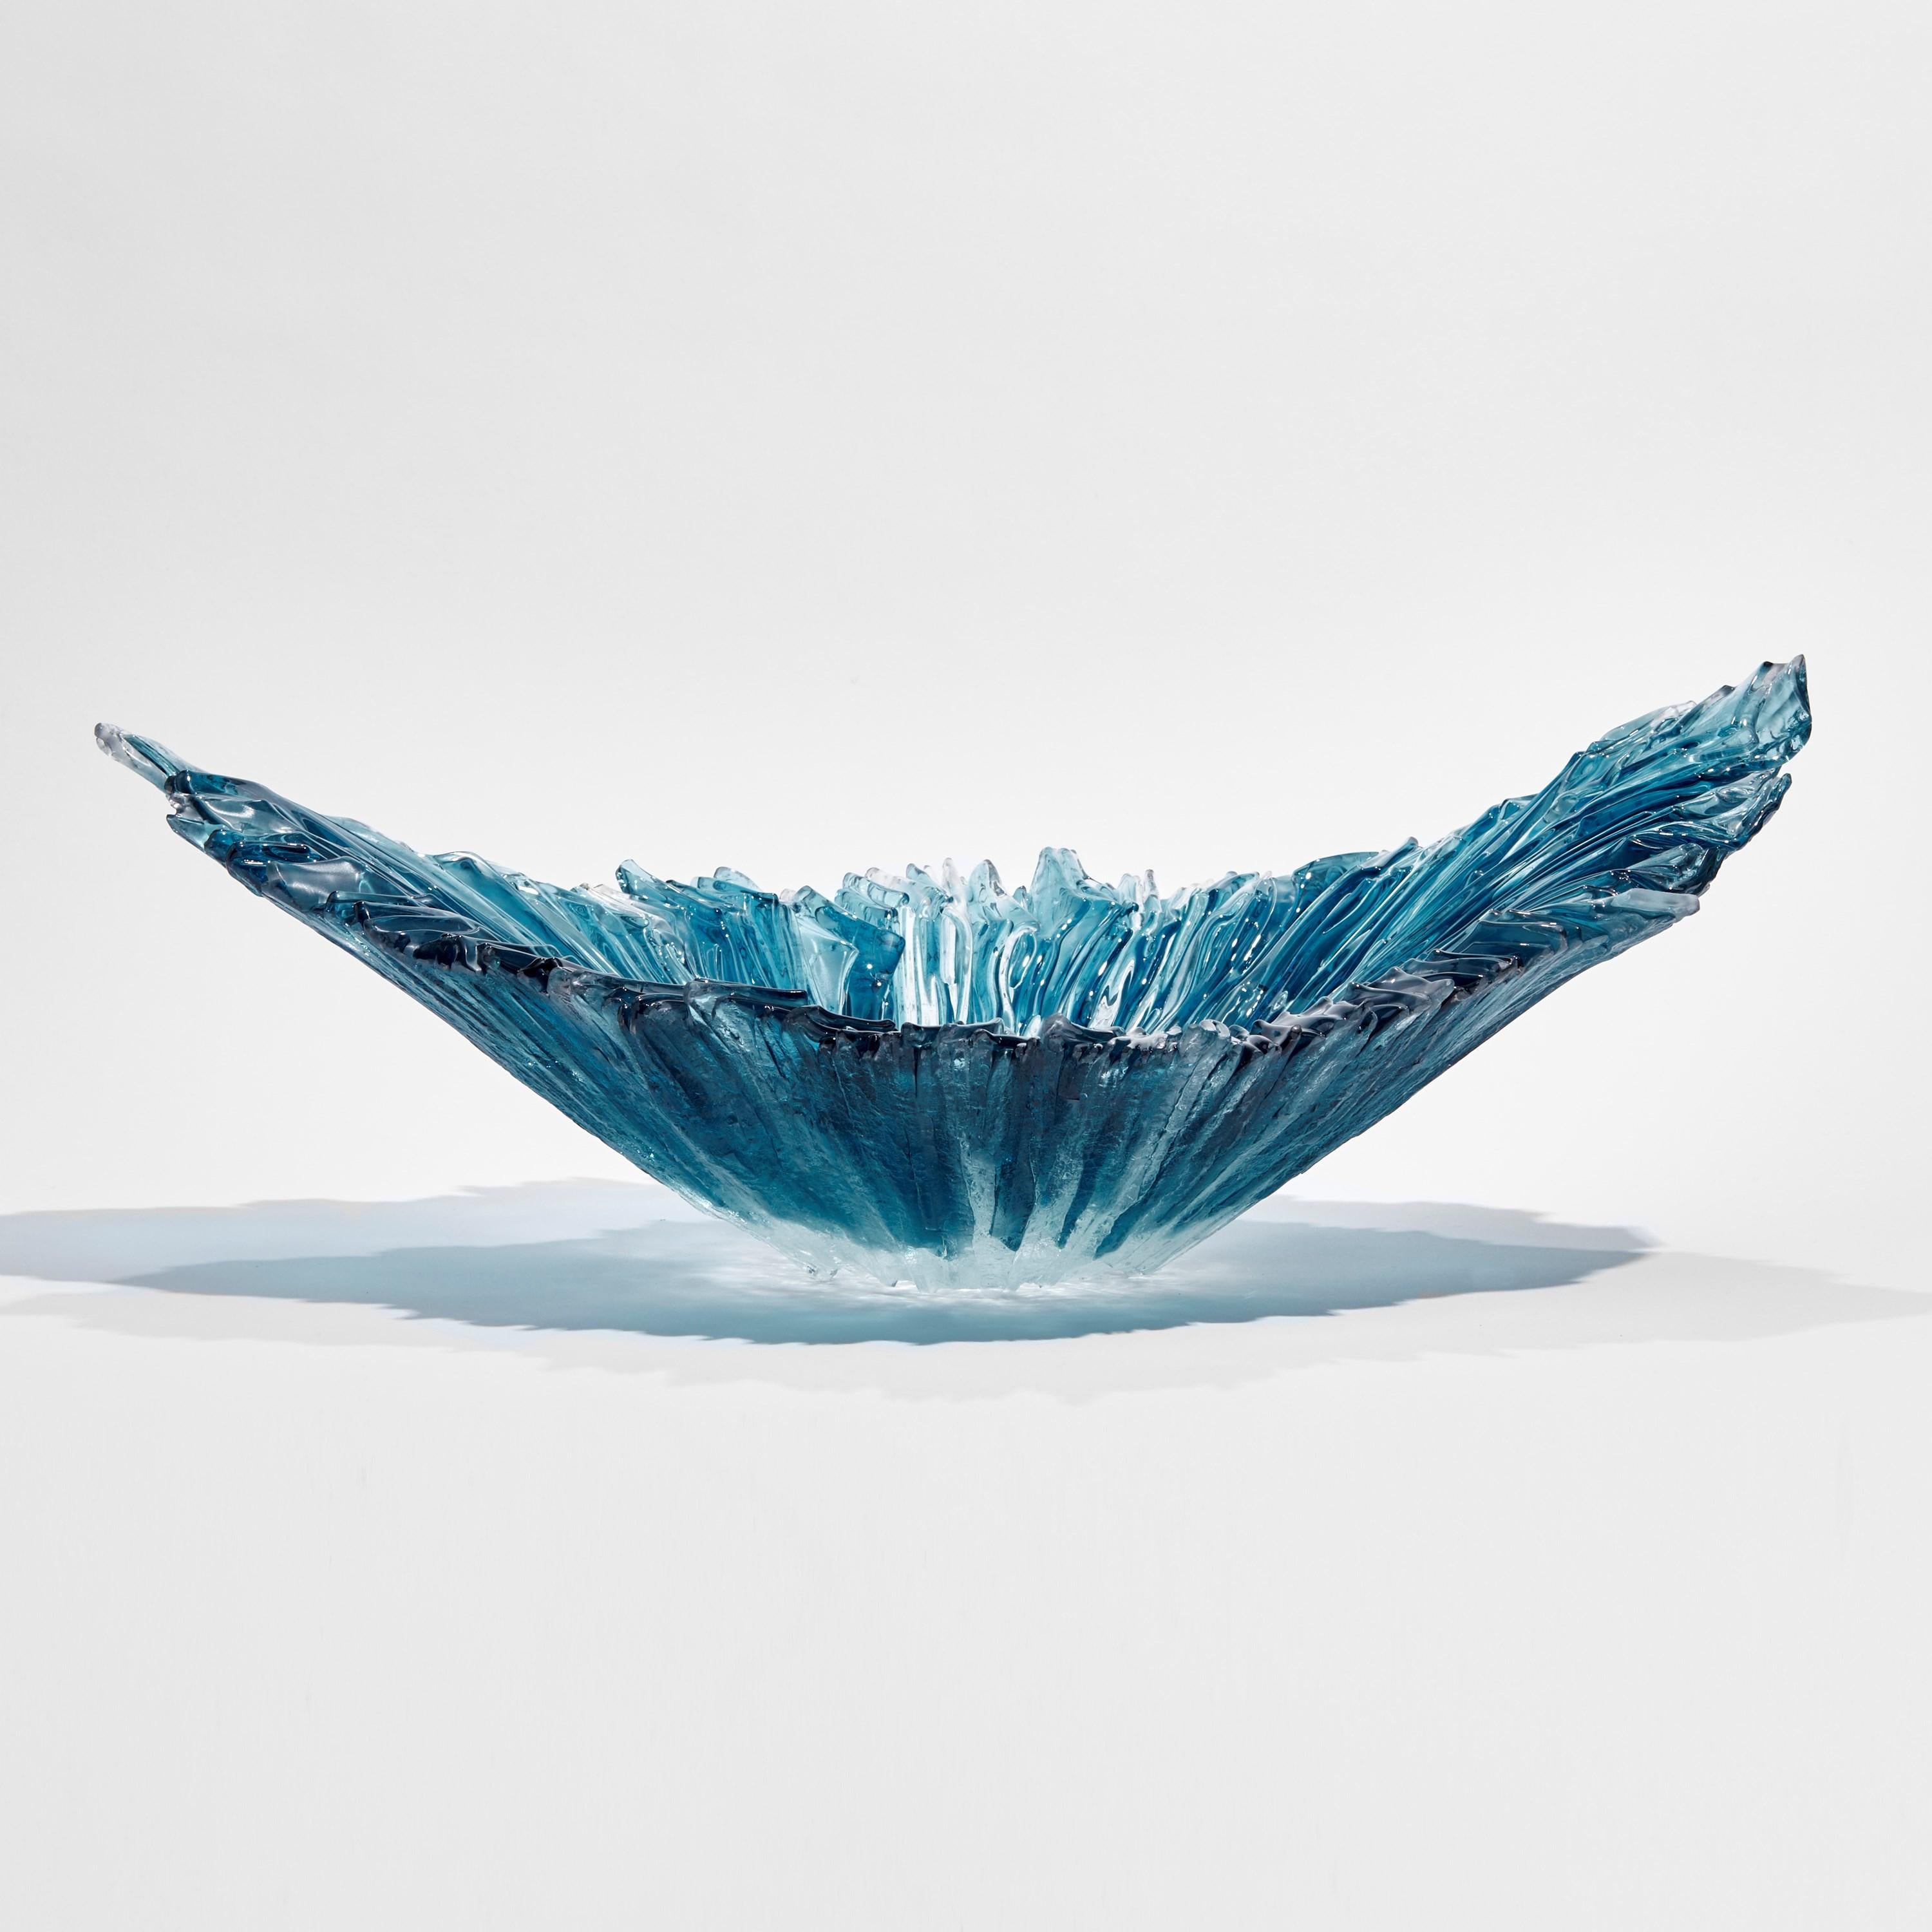 British Oval Coral Bowl in Aqua, a Blue Sculptural Glass Centrepiece by Wayne Charmer